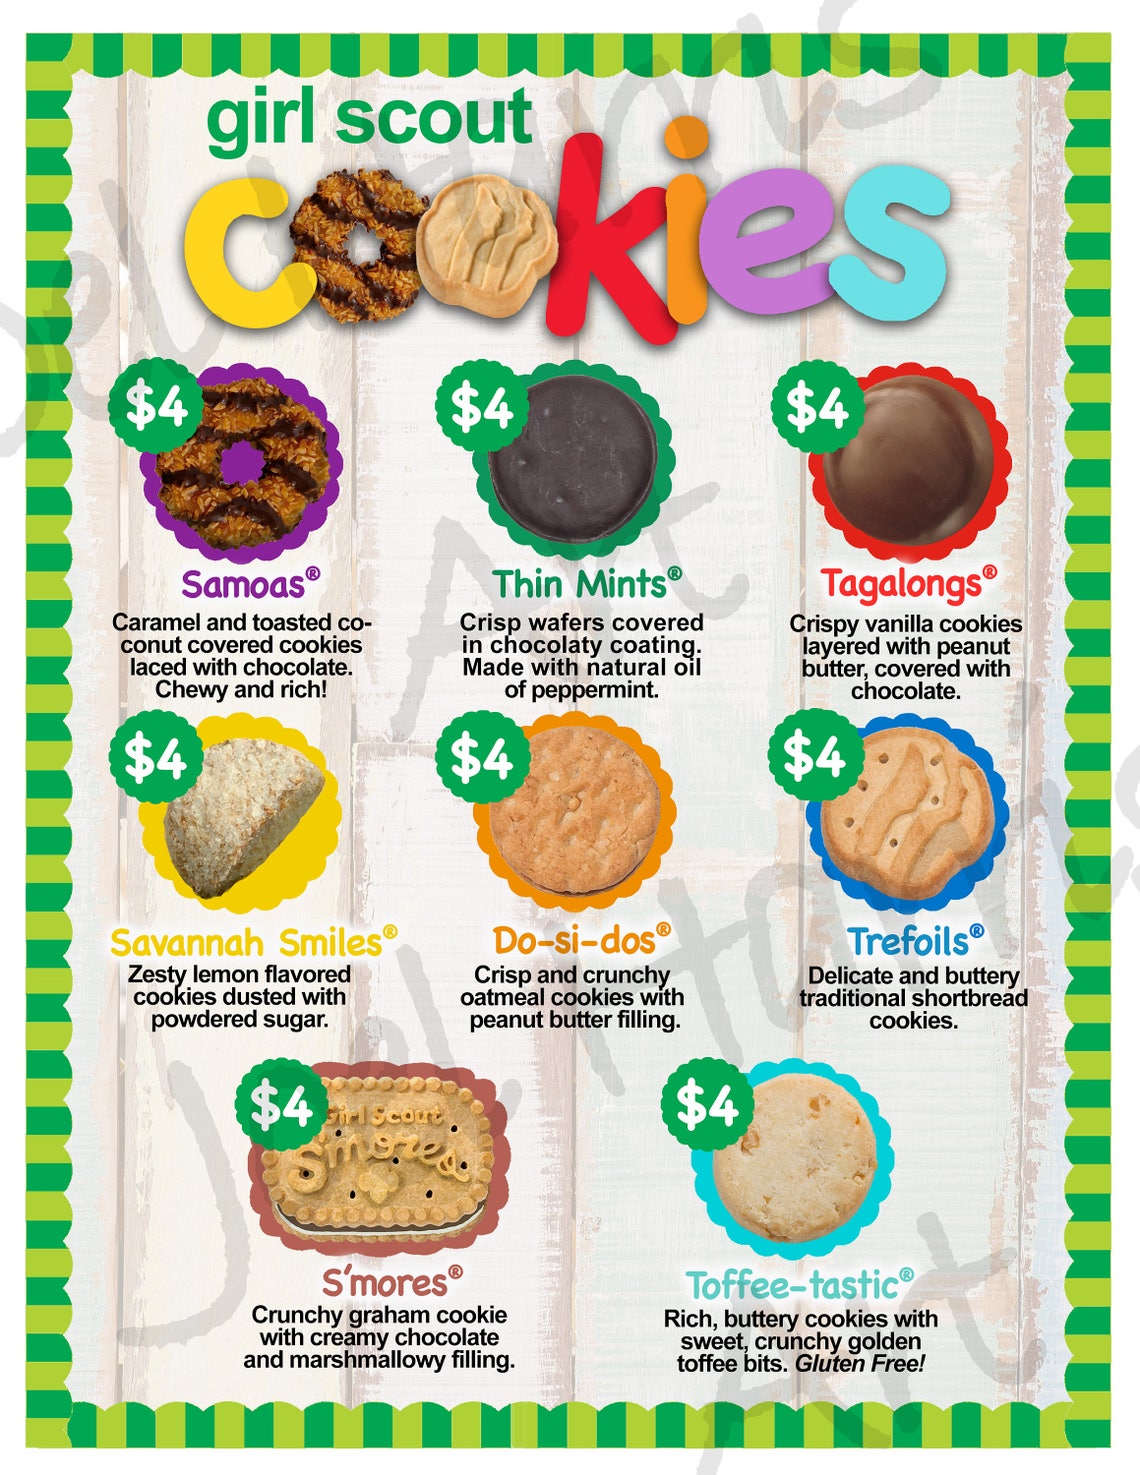 2018 LBB Girl Scout Cookie Price List GS Booth Menu 8.5 x 11 Etsy